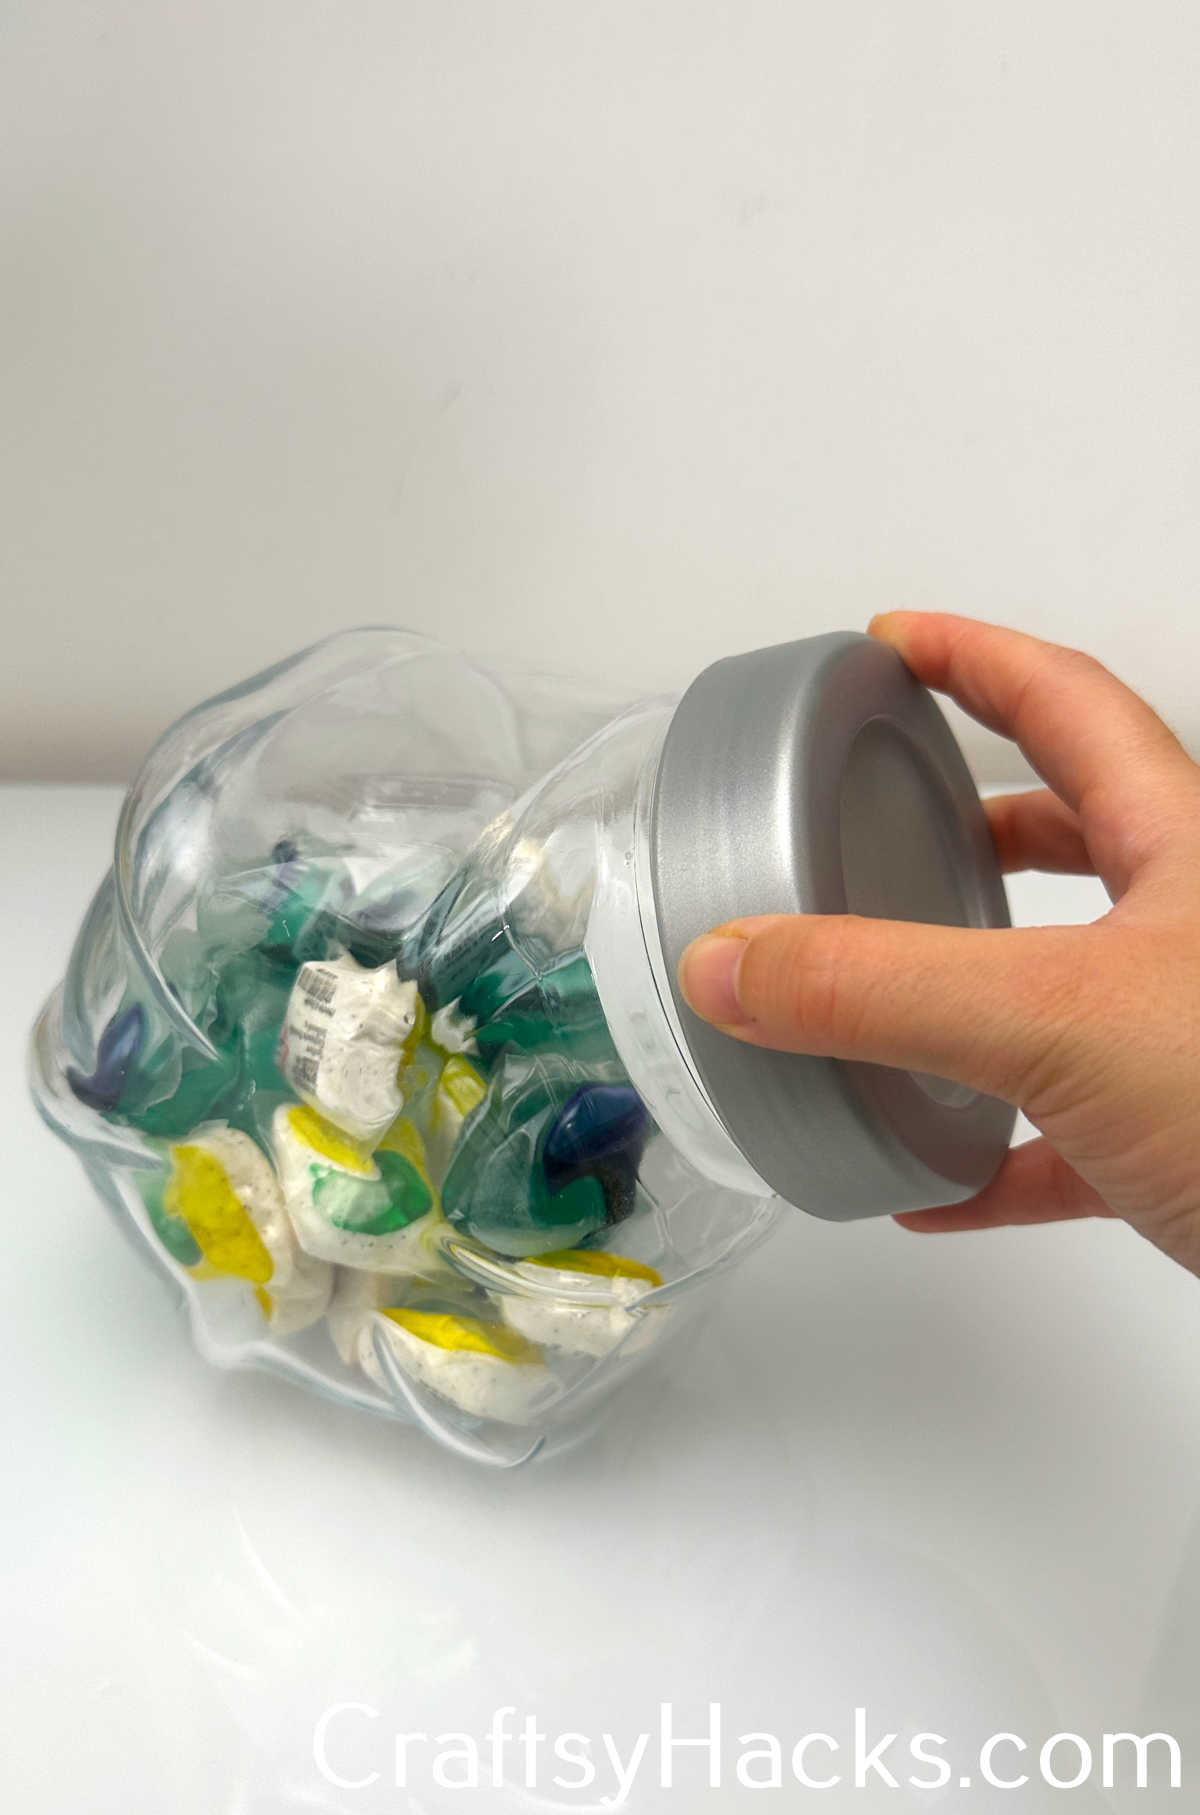 Store Laundry Pods in a Cookie Jar